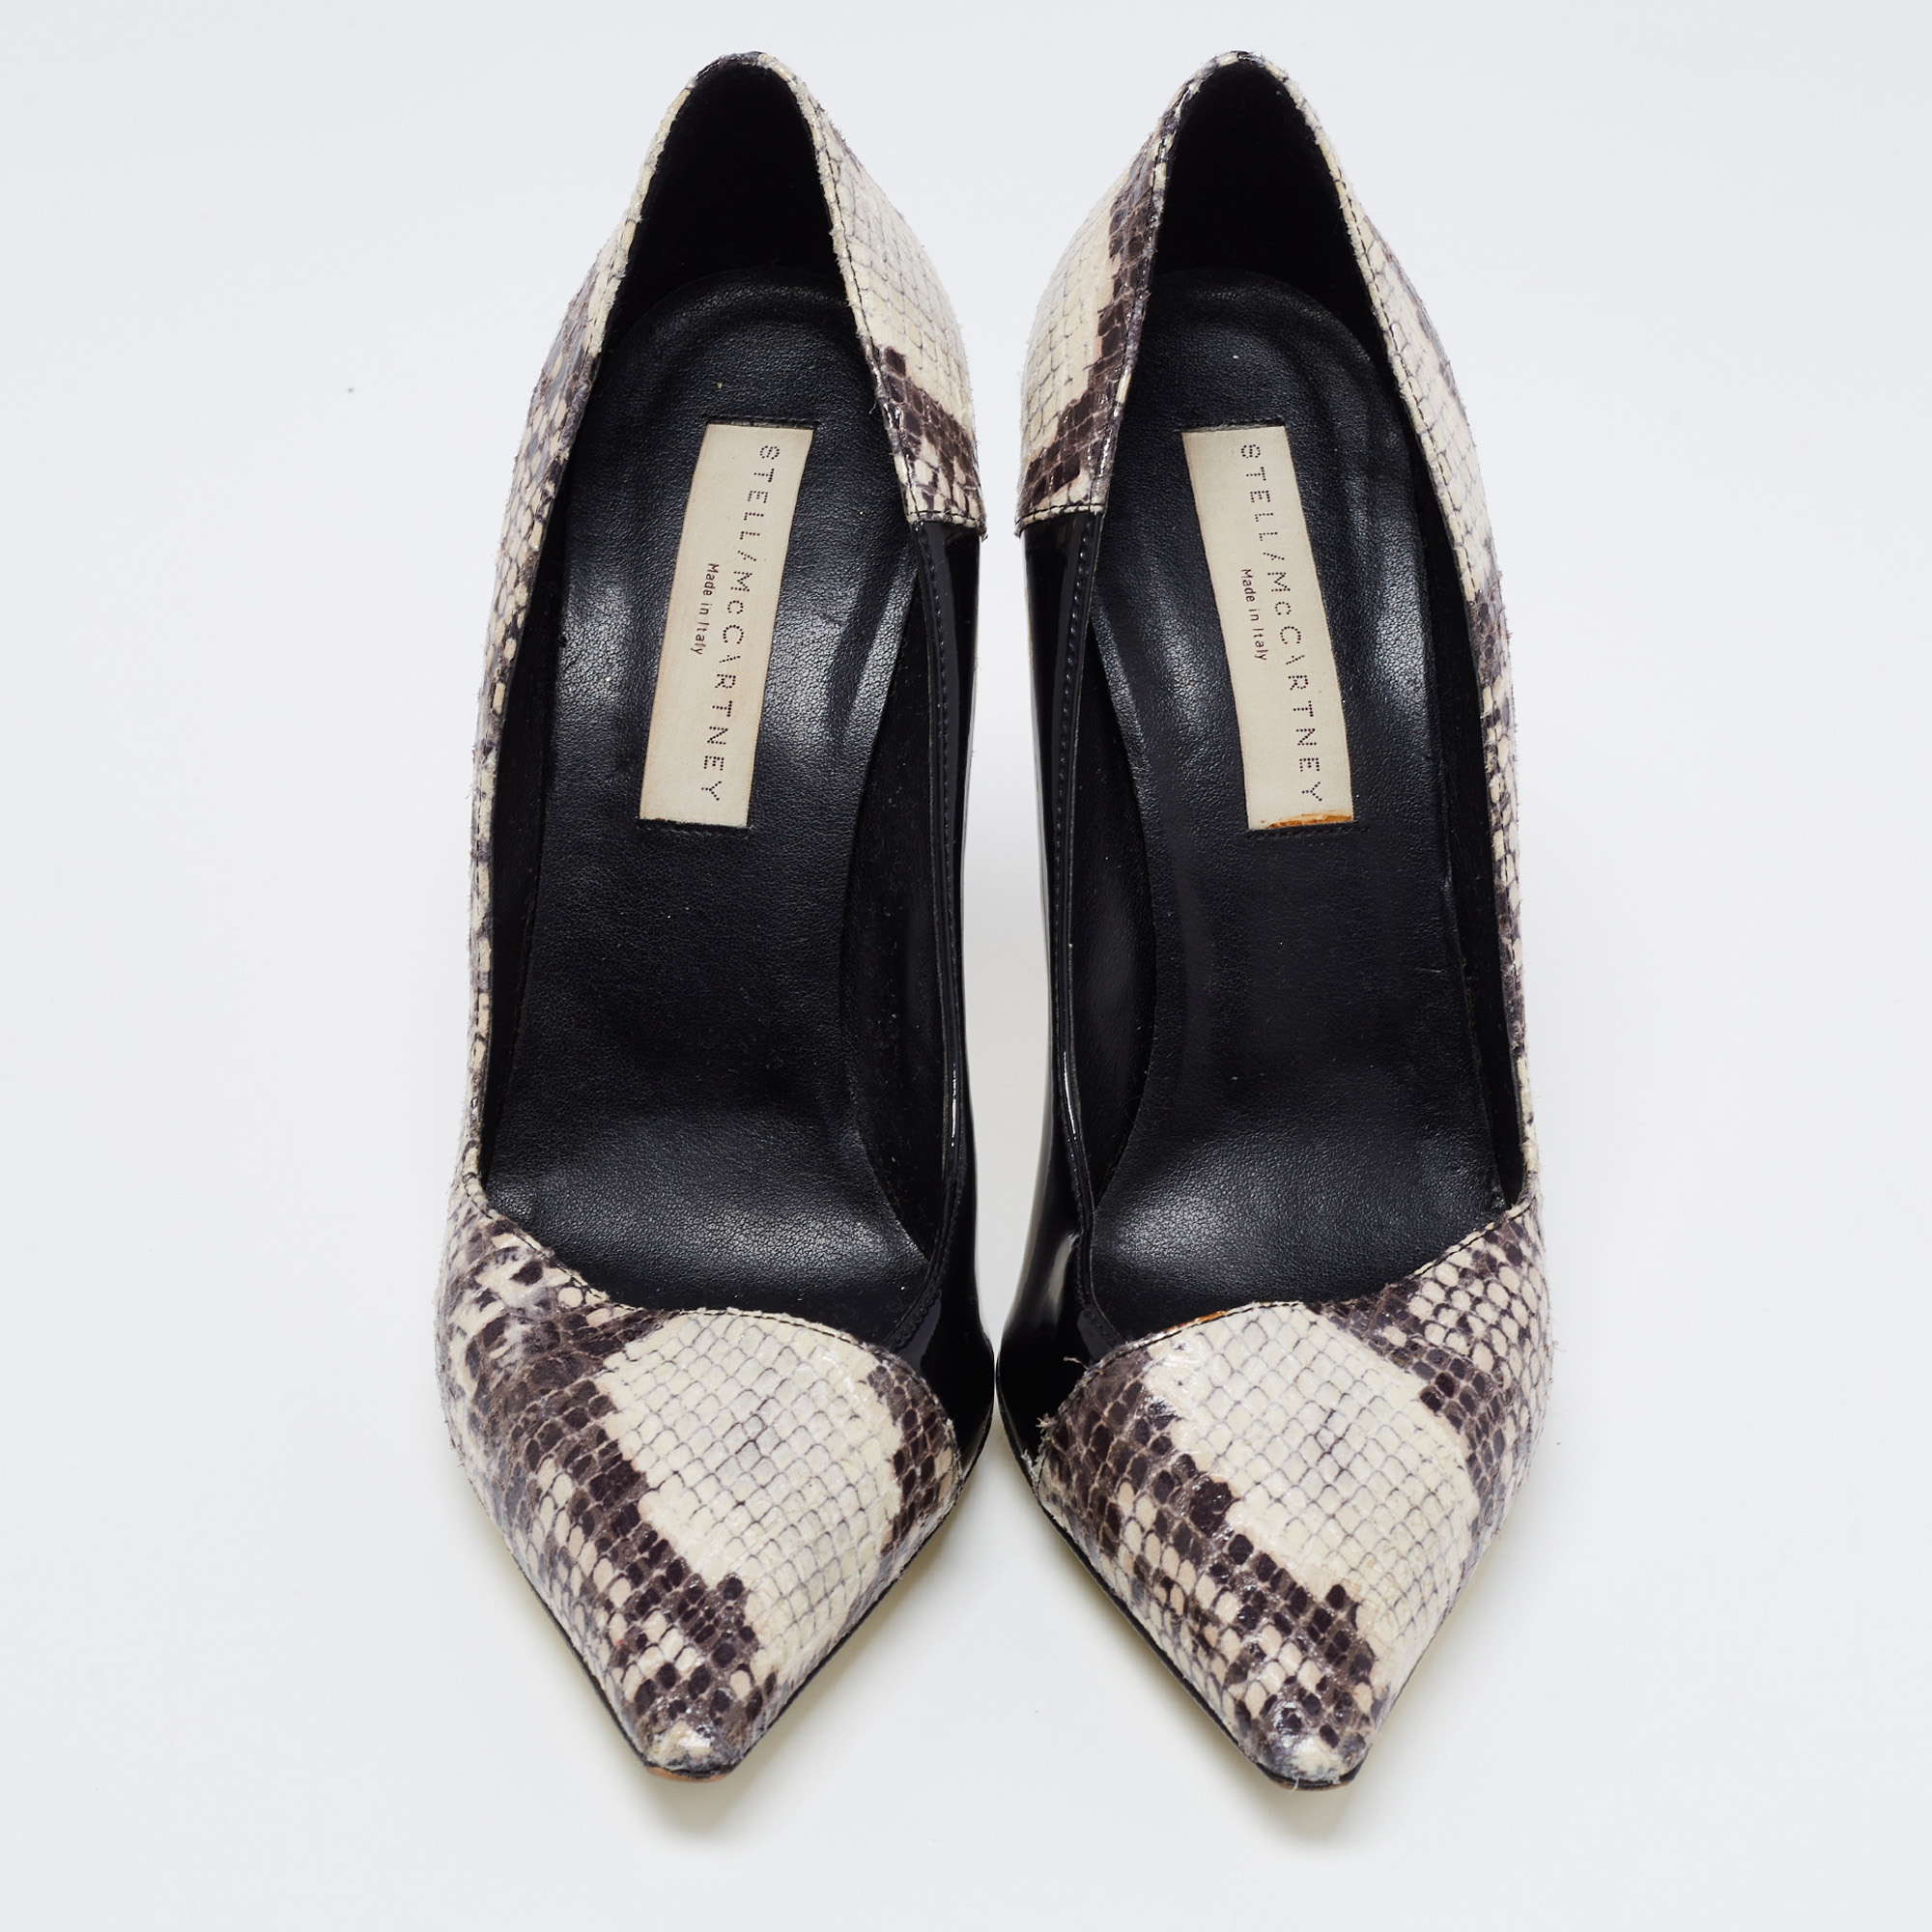 Stella McCartney Tri Color Faux Patent And Snakeskin Embossed Leather D'orsay Pumps Size 38.5